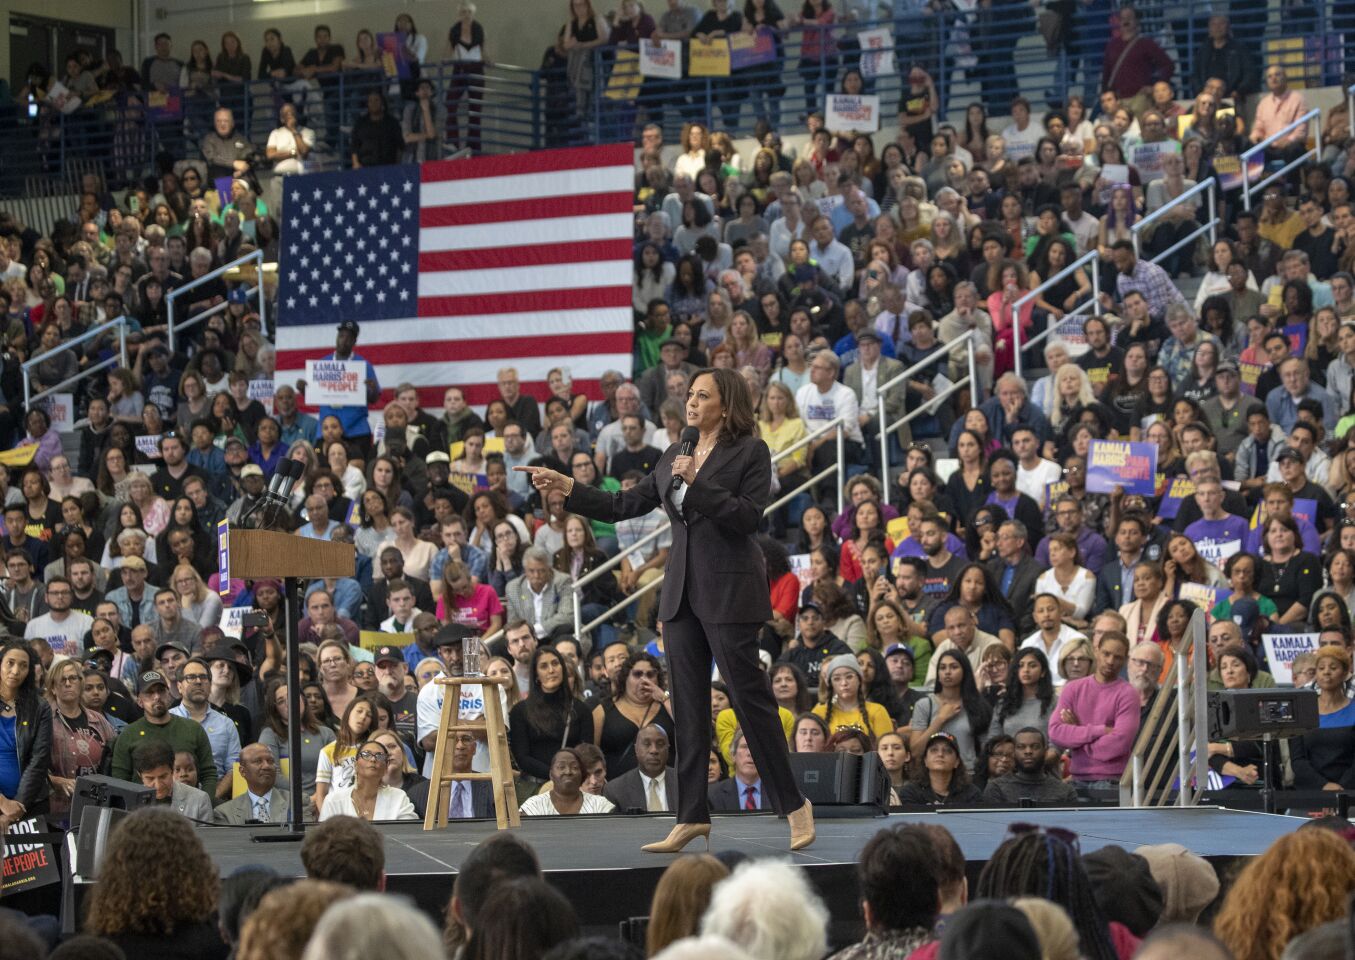 May 19, 2019: Sen. Kamala Harris speaks at her first campaign organizing event at LA Southwest College in Los Angeles.